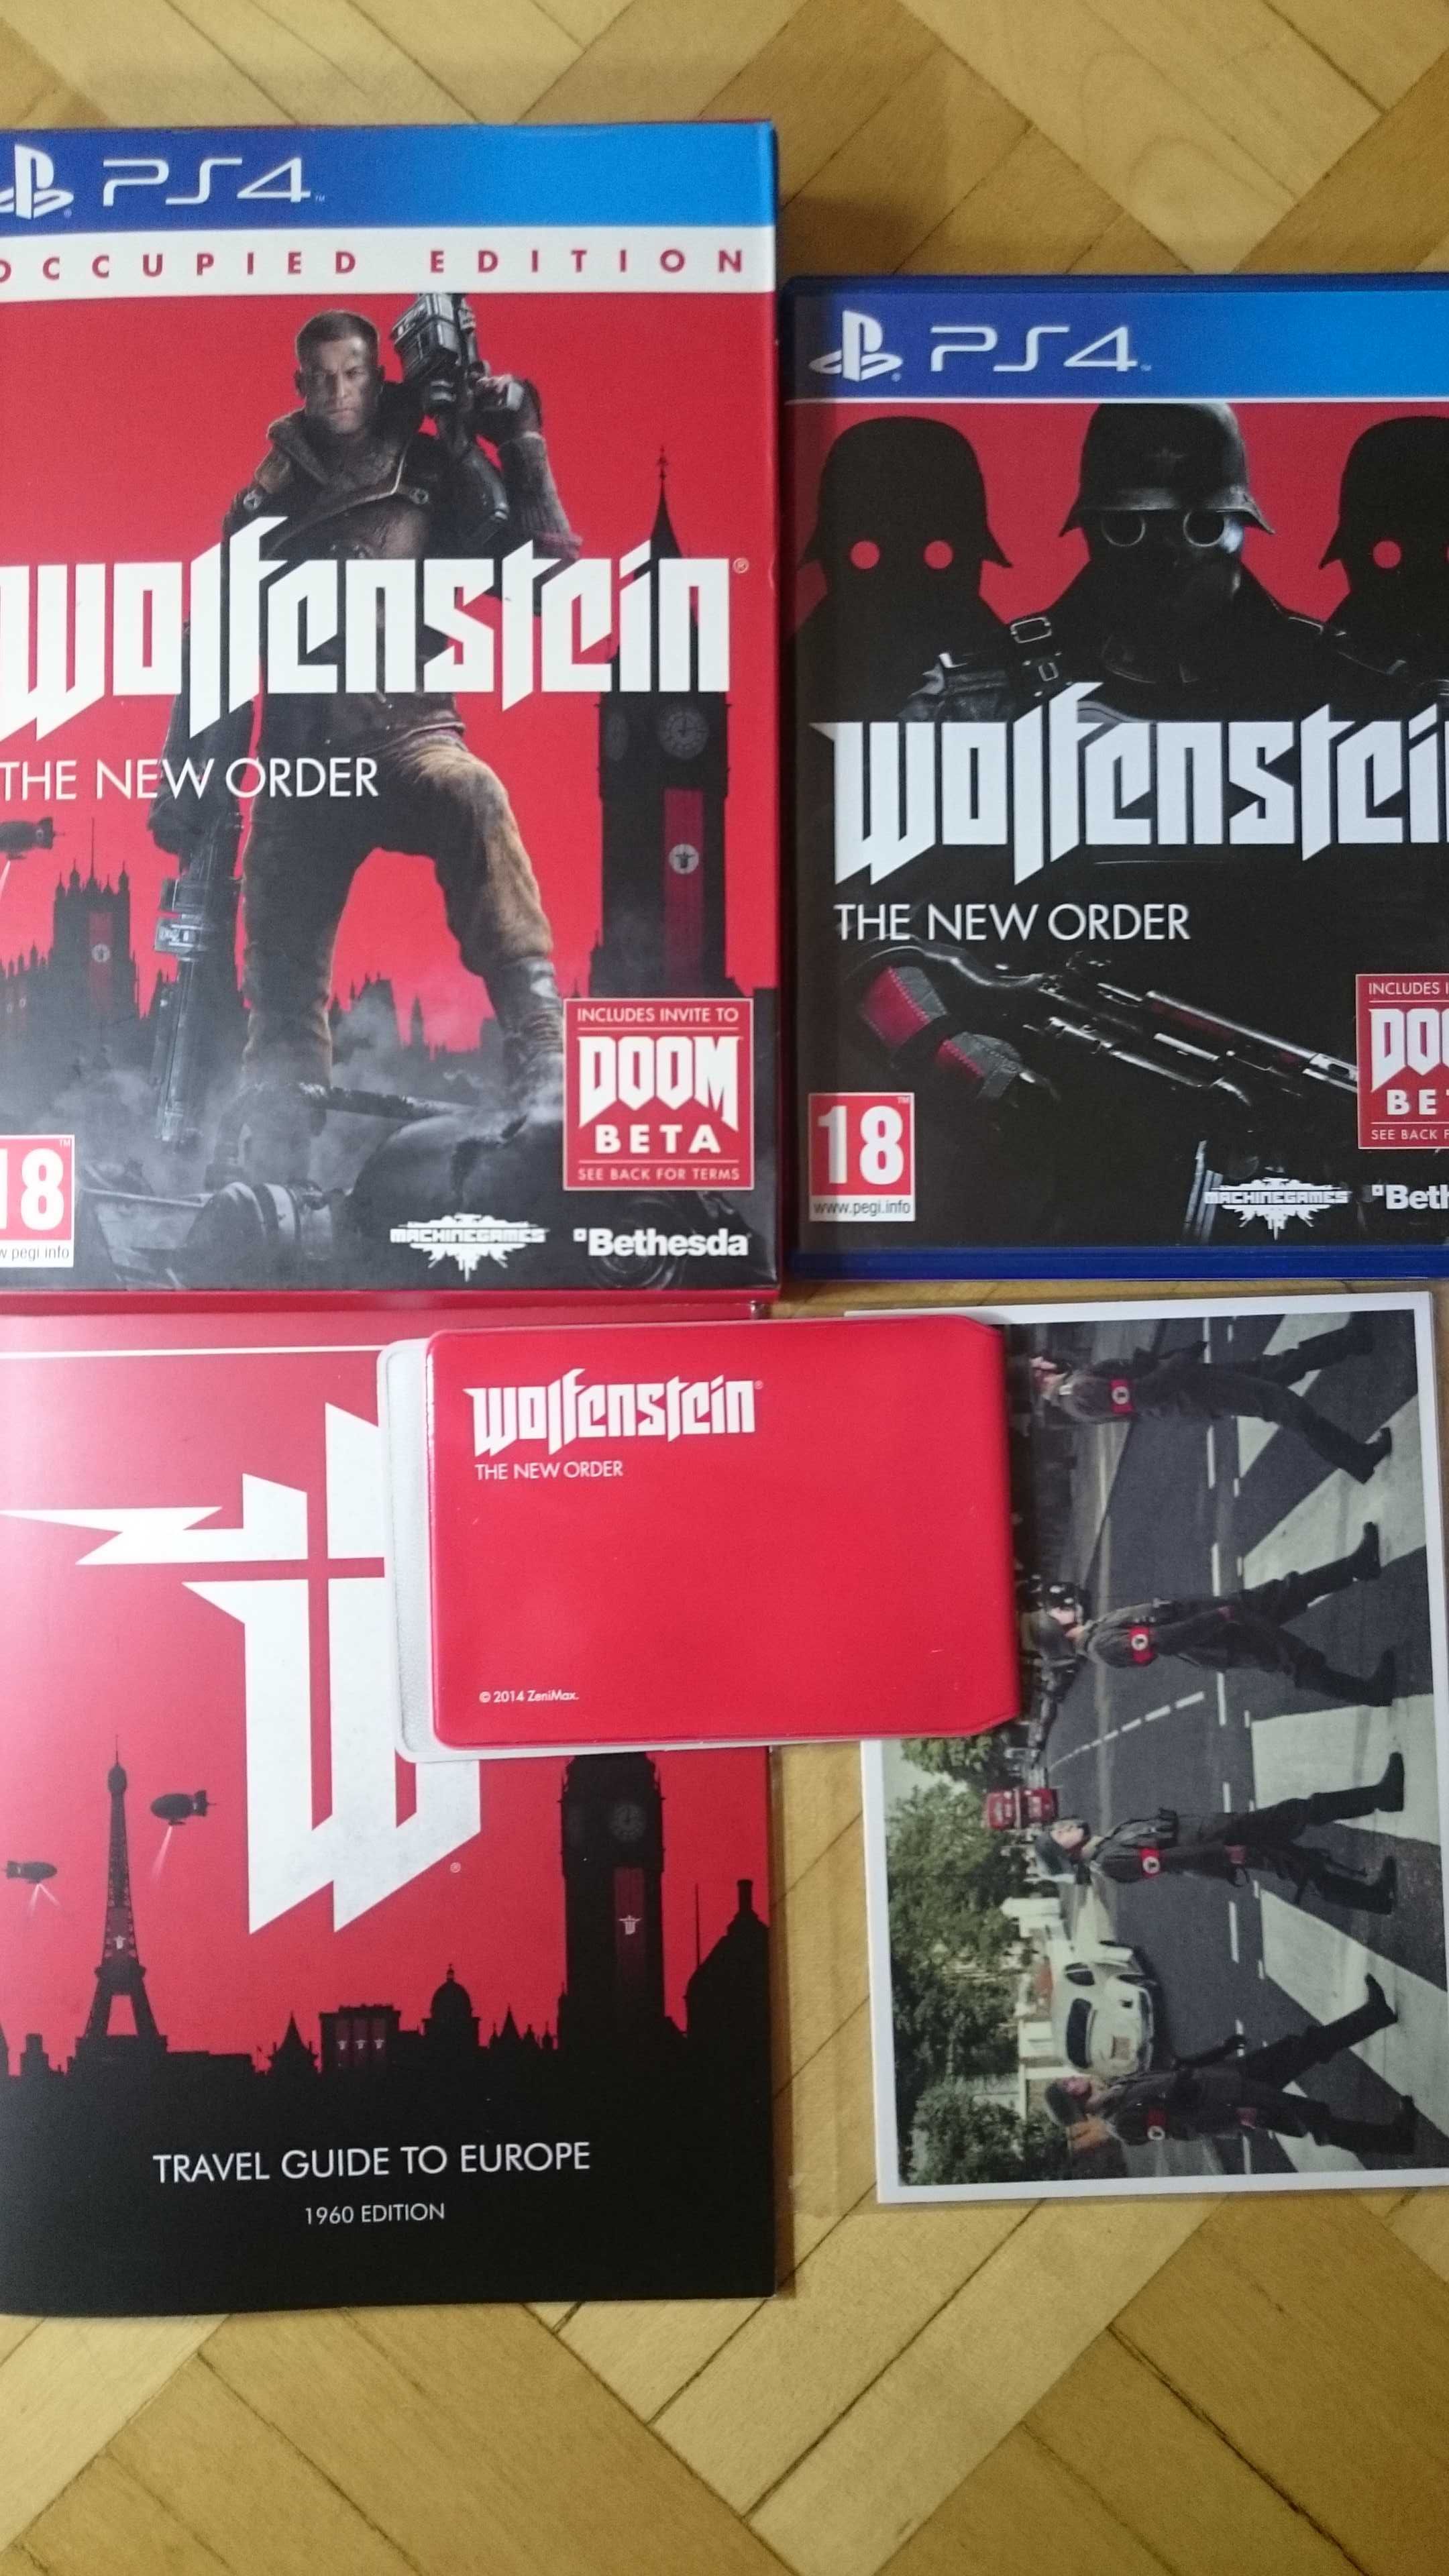 Wolfenstein The New Order Occupied ed. ps4 playstation 4 Call of duty